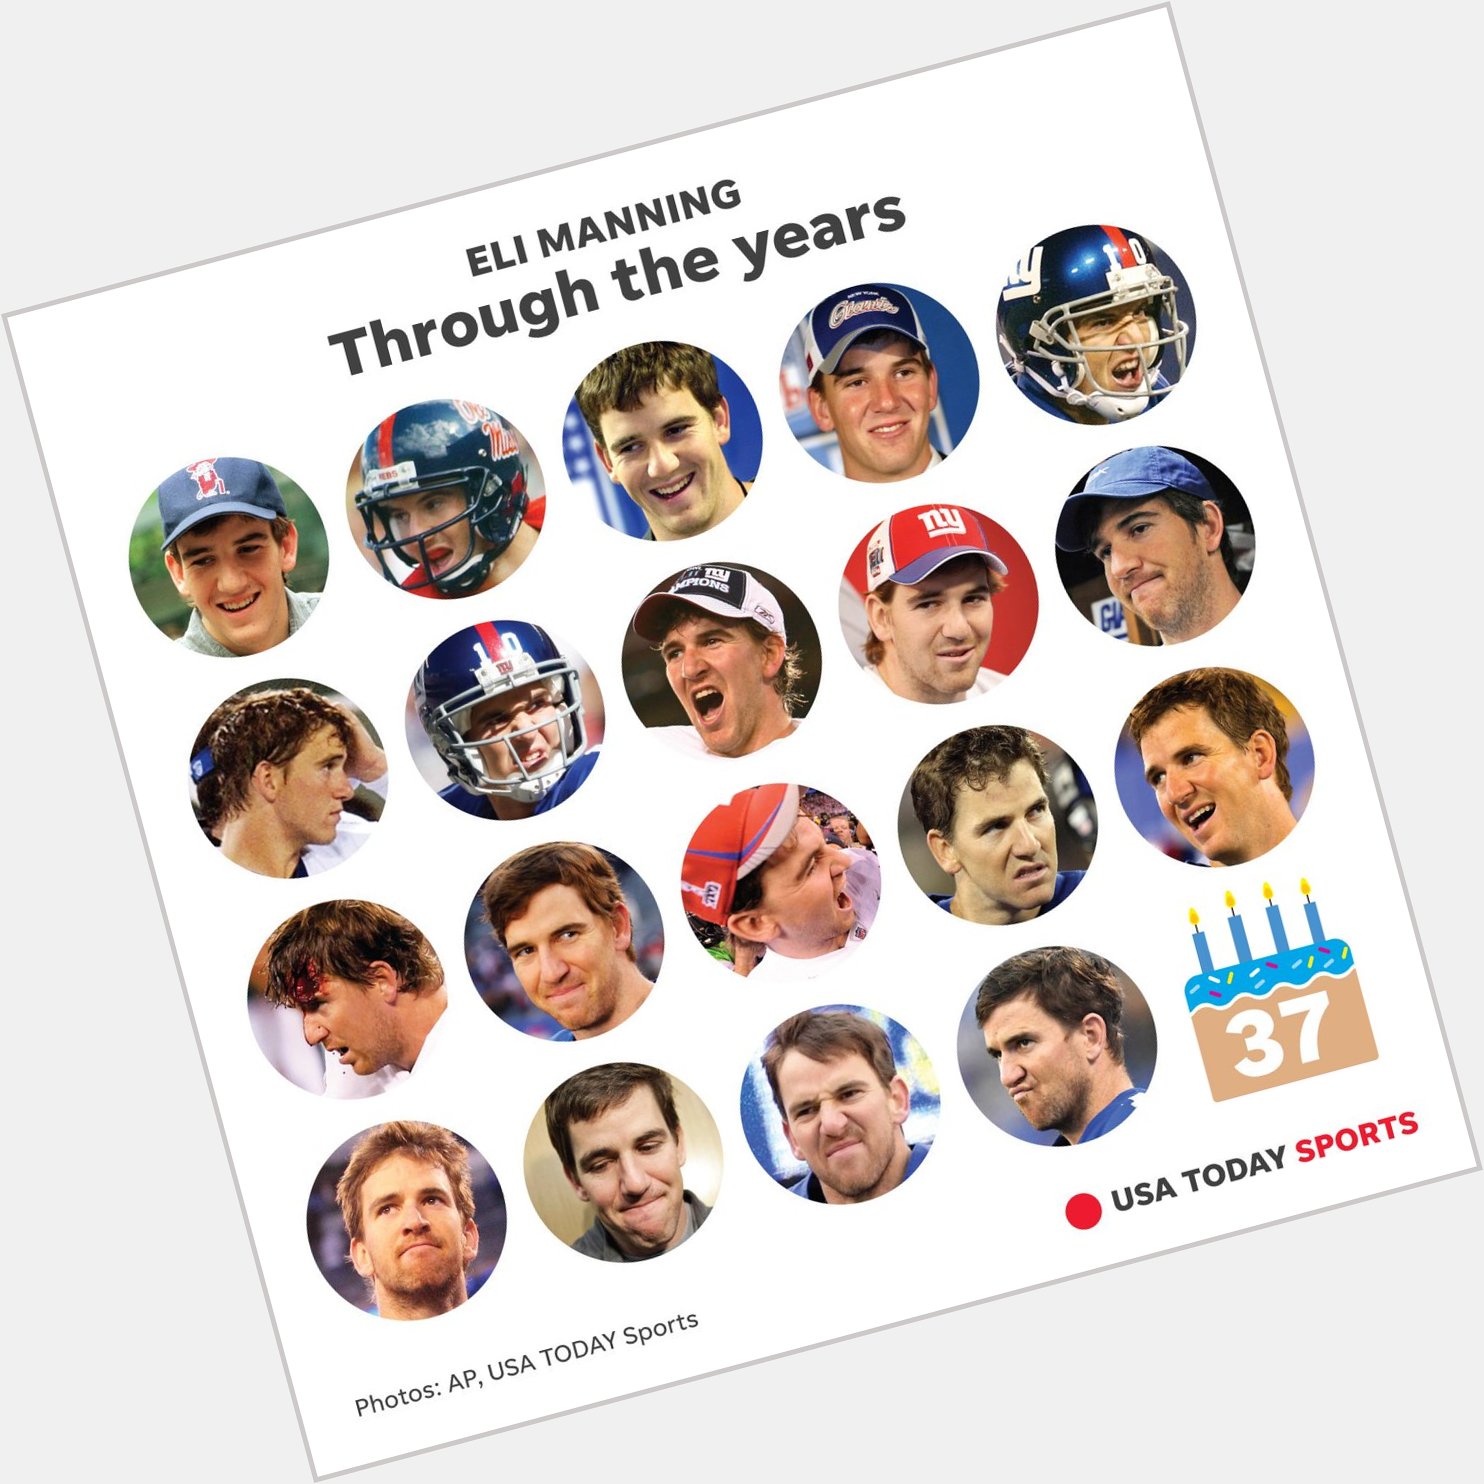 Oh the many faces of Eli Manning! 

Happy 37th birthday 